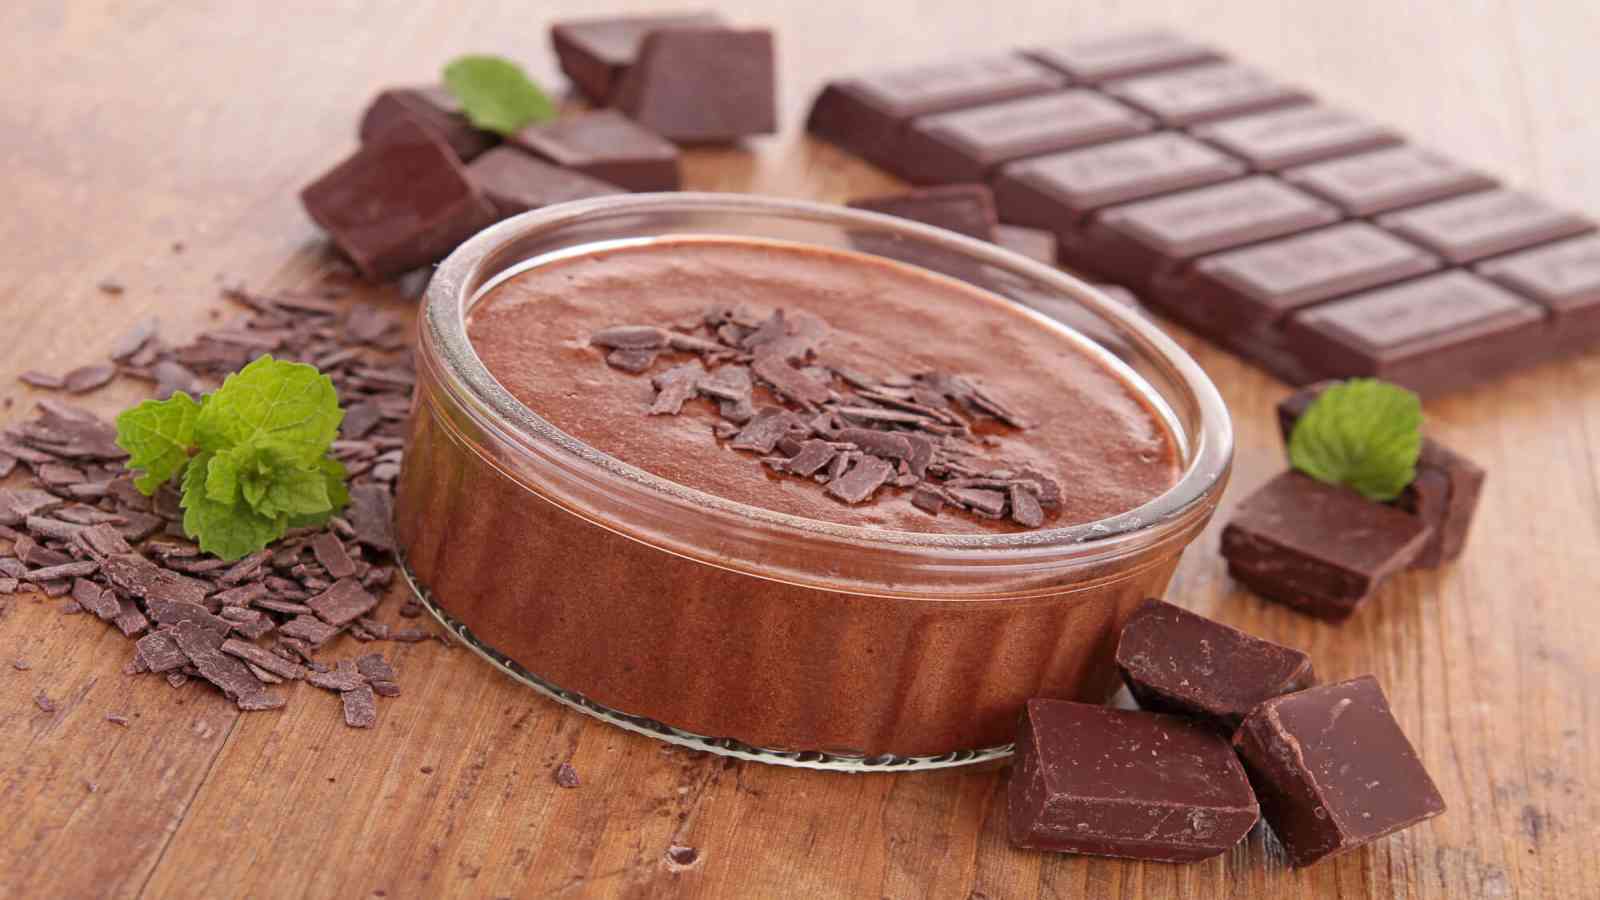 National Chocolate Mousse Day 2023: Date, History, Facts, Activities